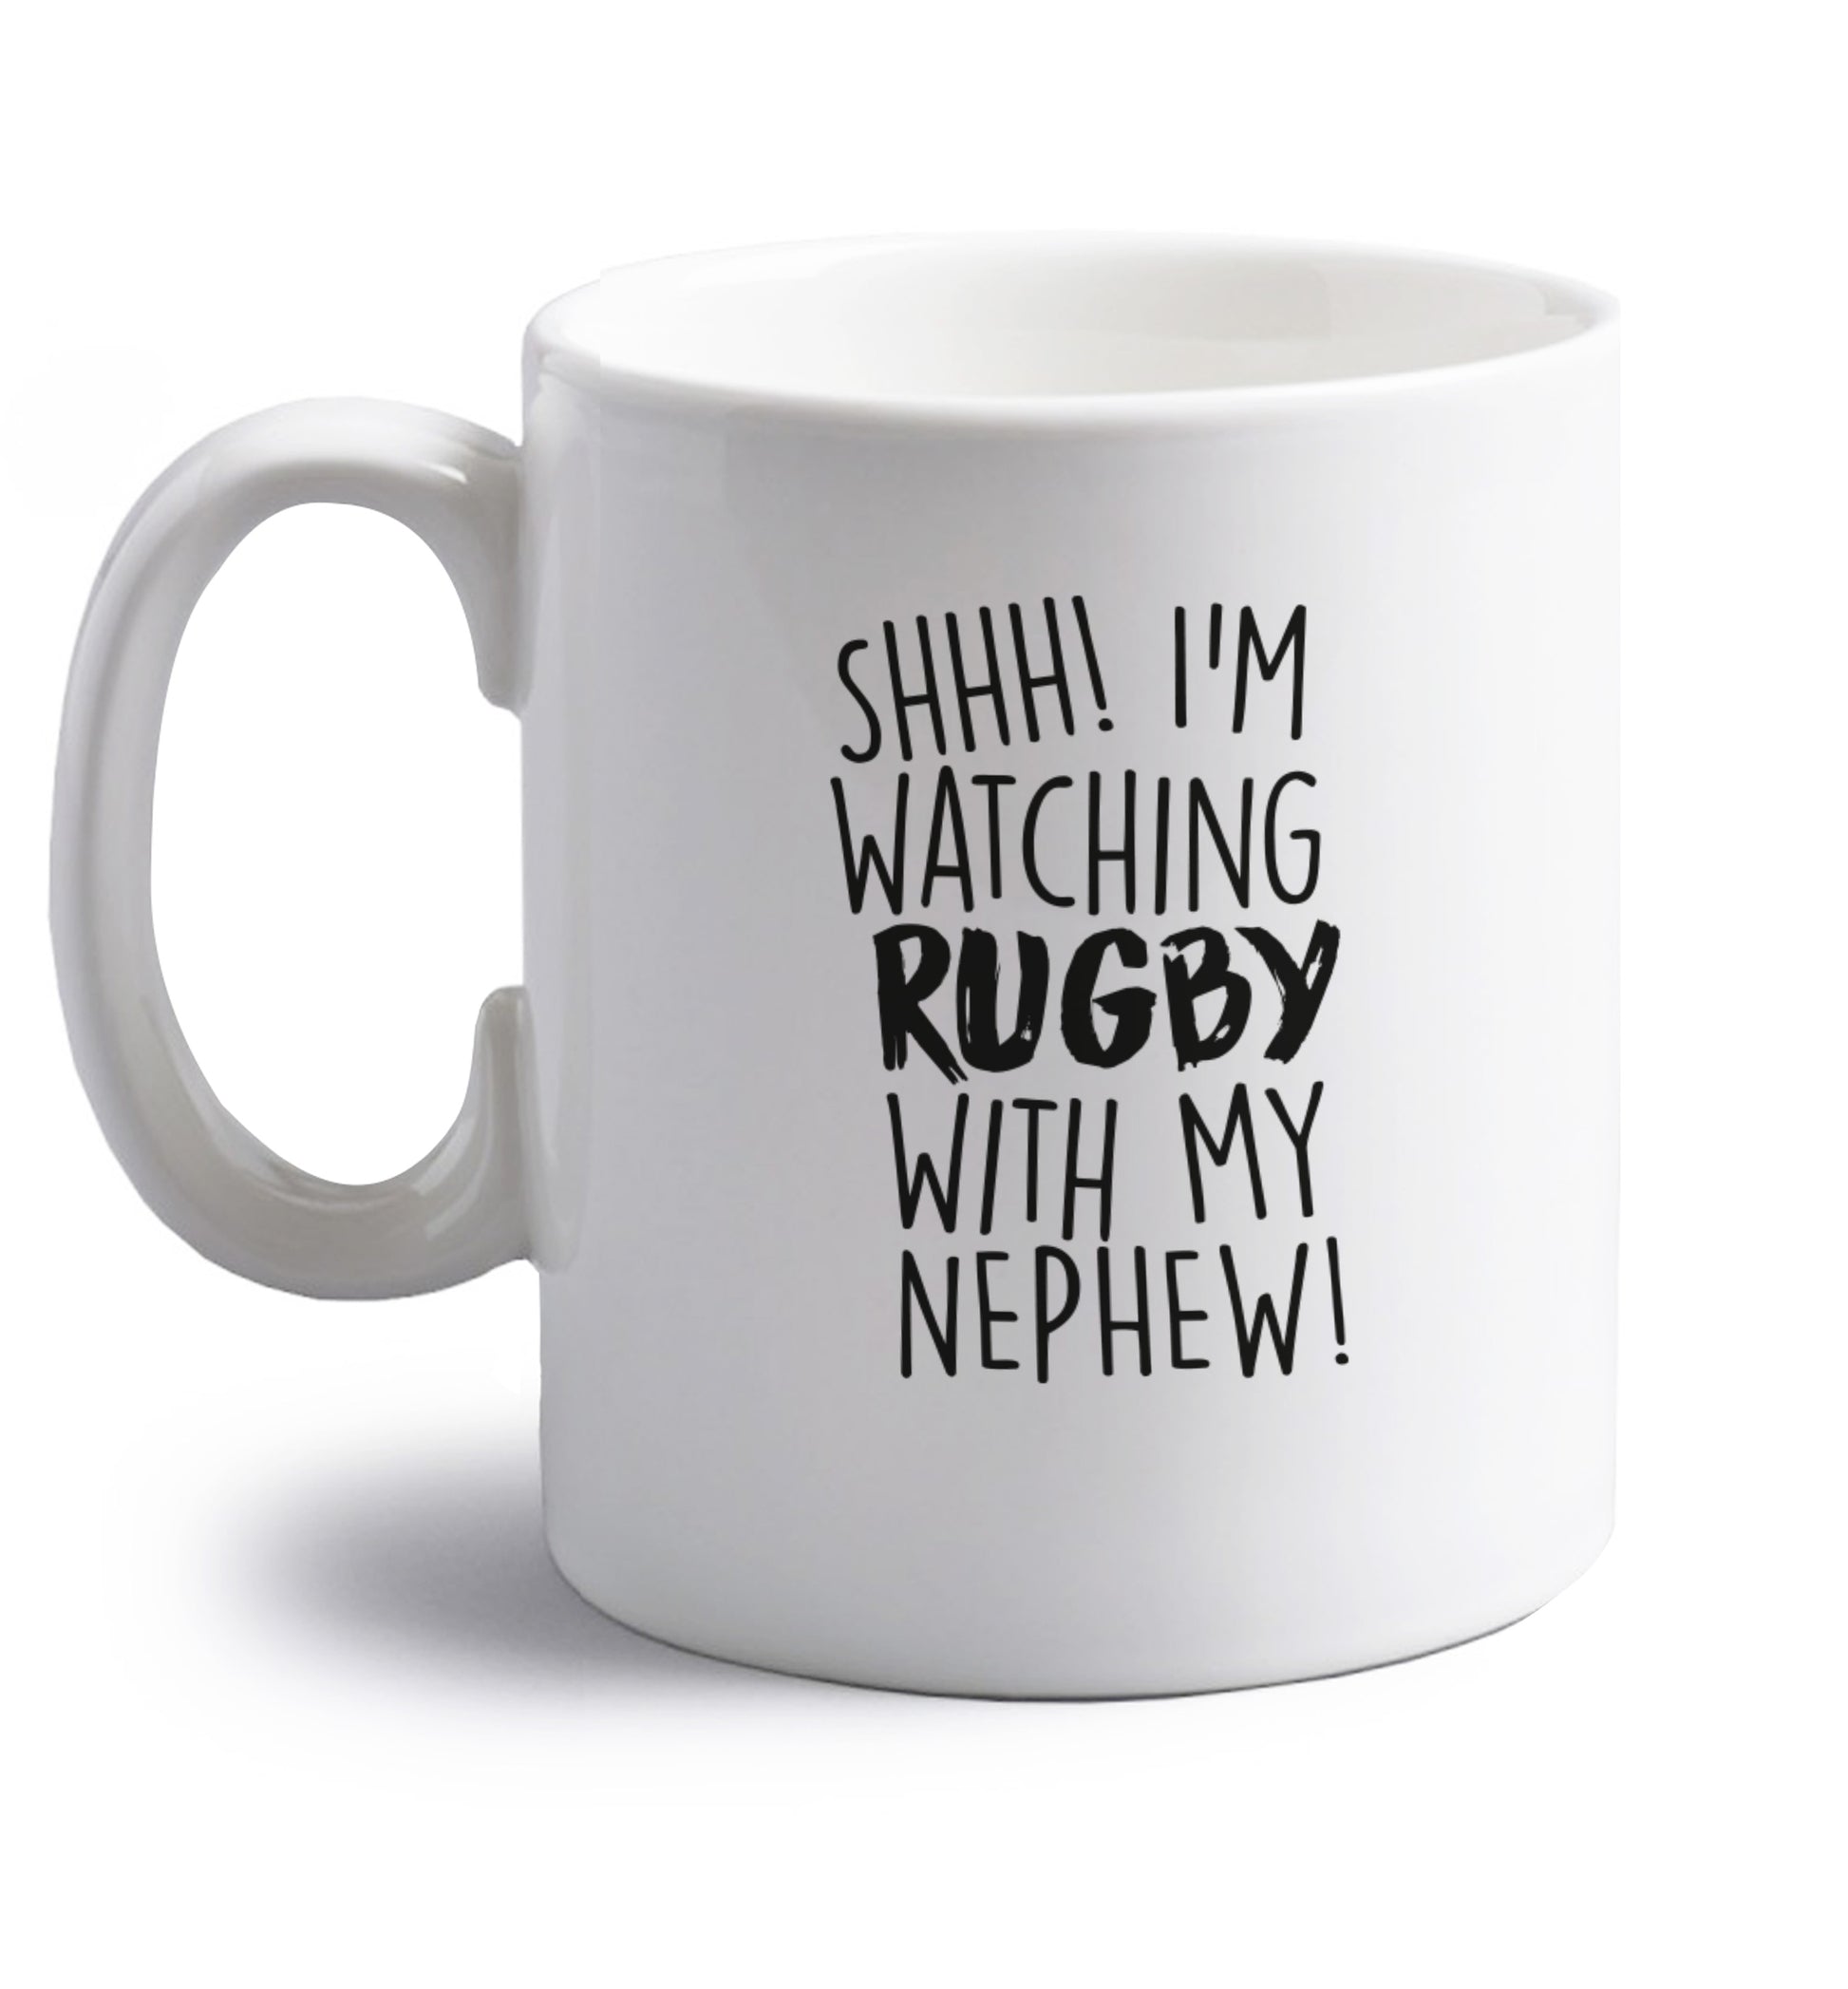 Shh.. I'm watching rugby with my nephew right handed white ceramic mug 